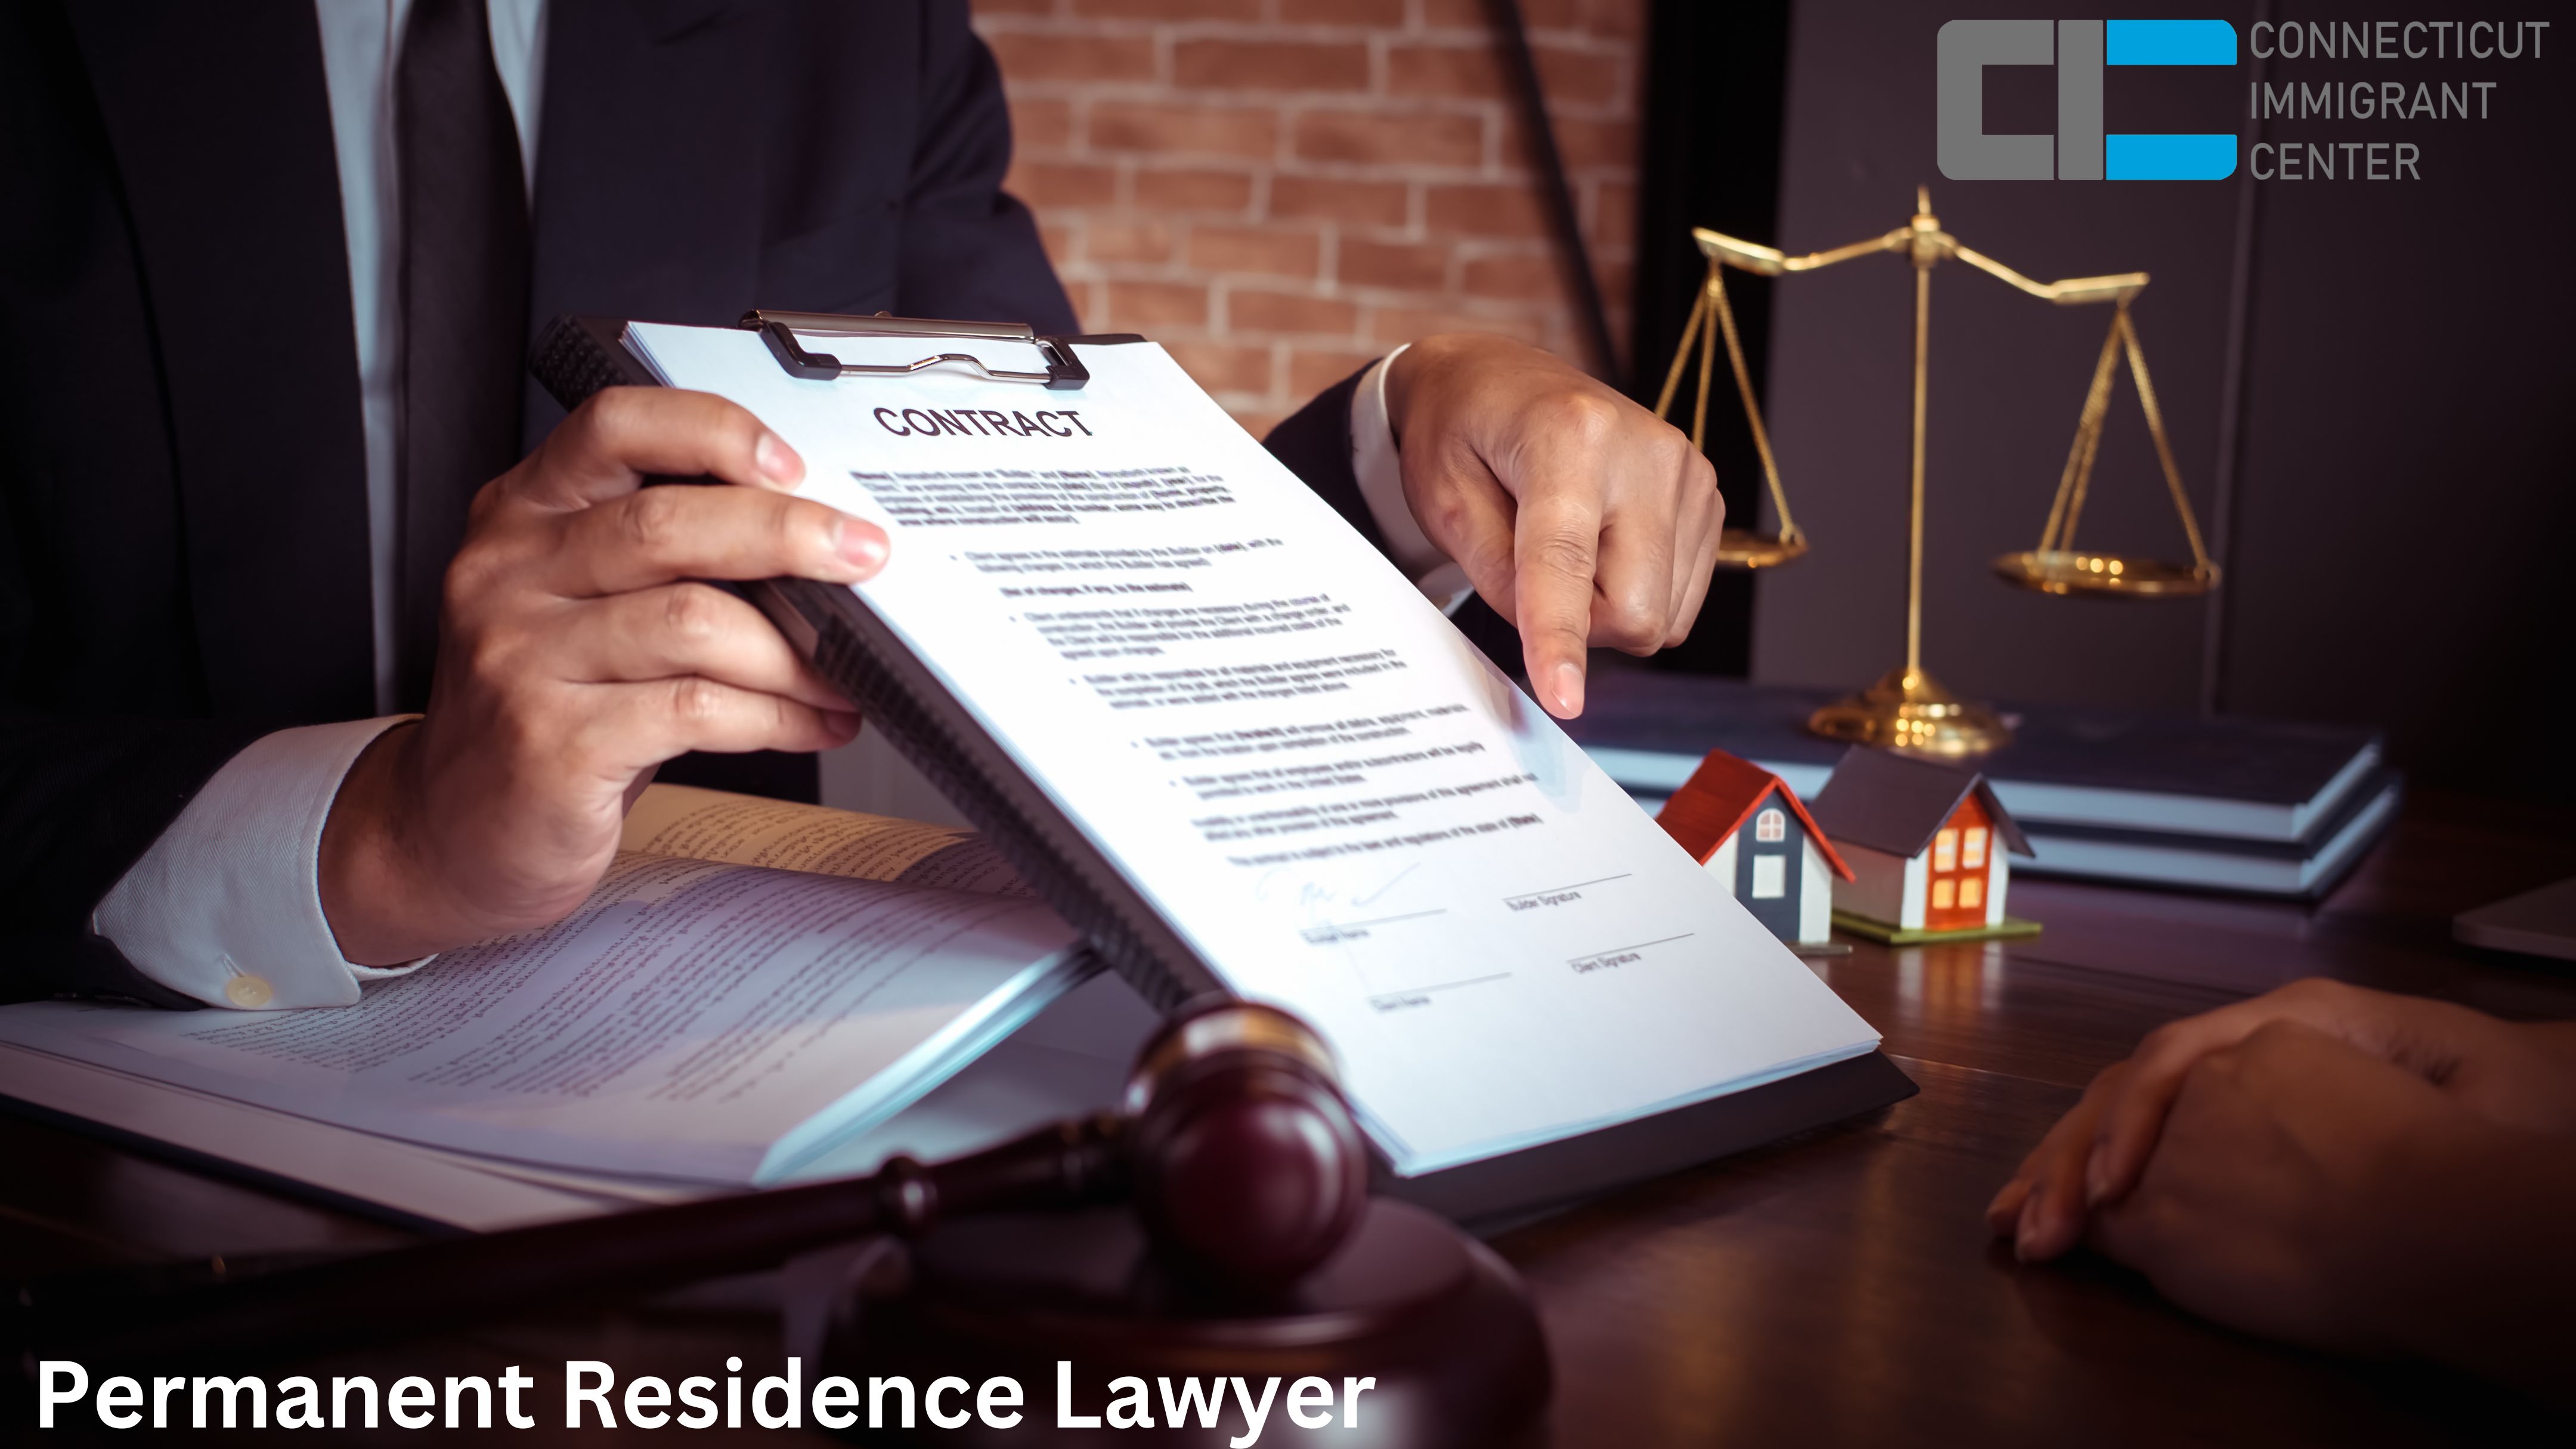 Immigration Defense Lawyer - Connecticut - Hartford ID1514400 2